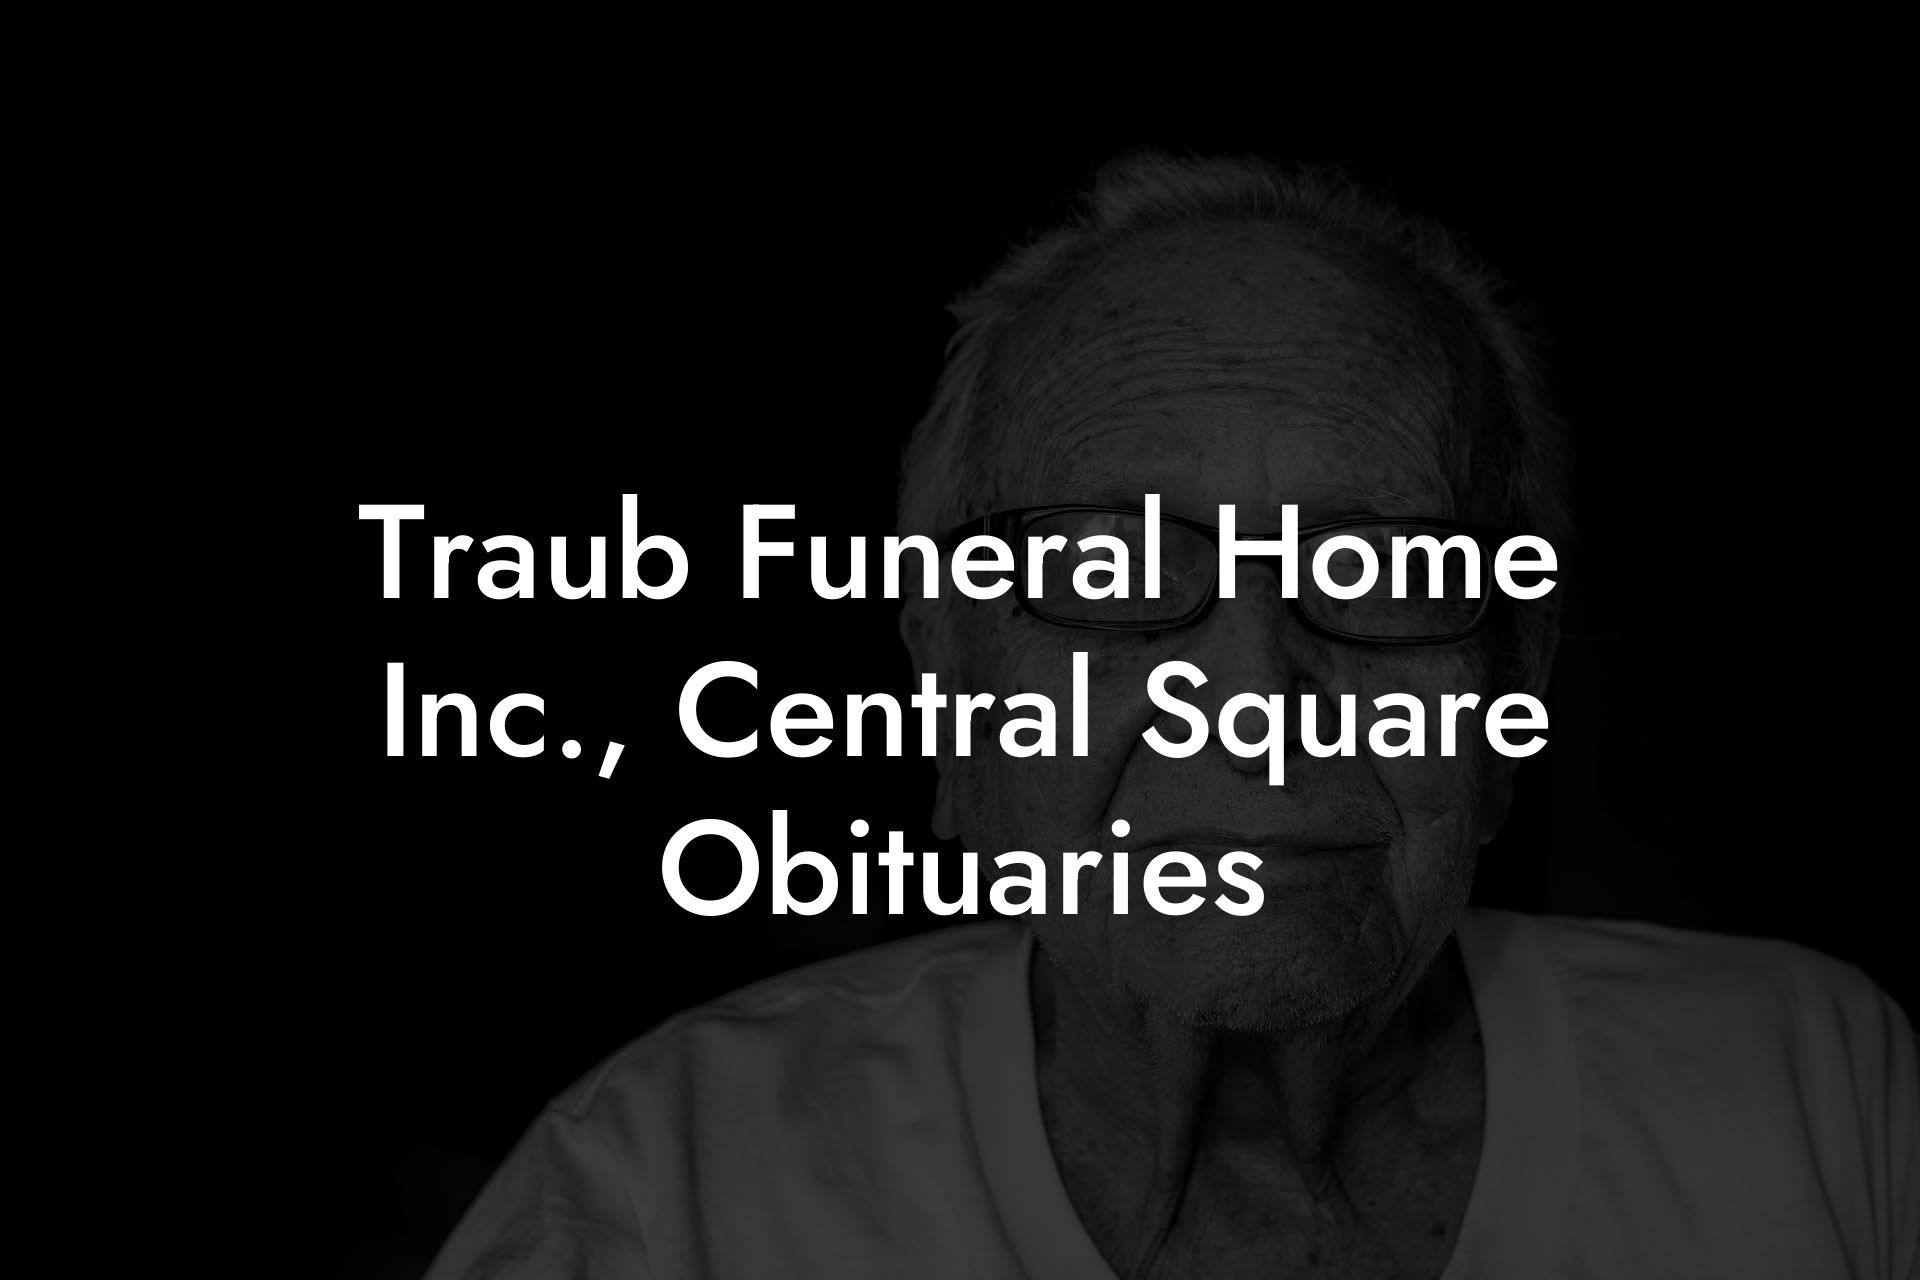 Traub Funeral Home Inc., Central Square Obituaries